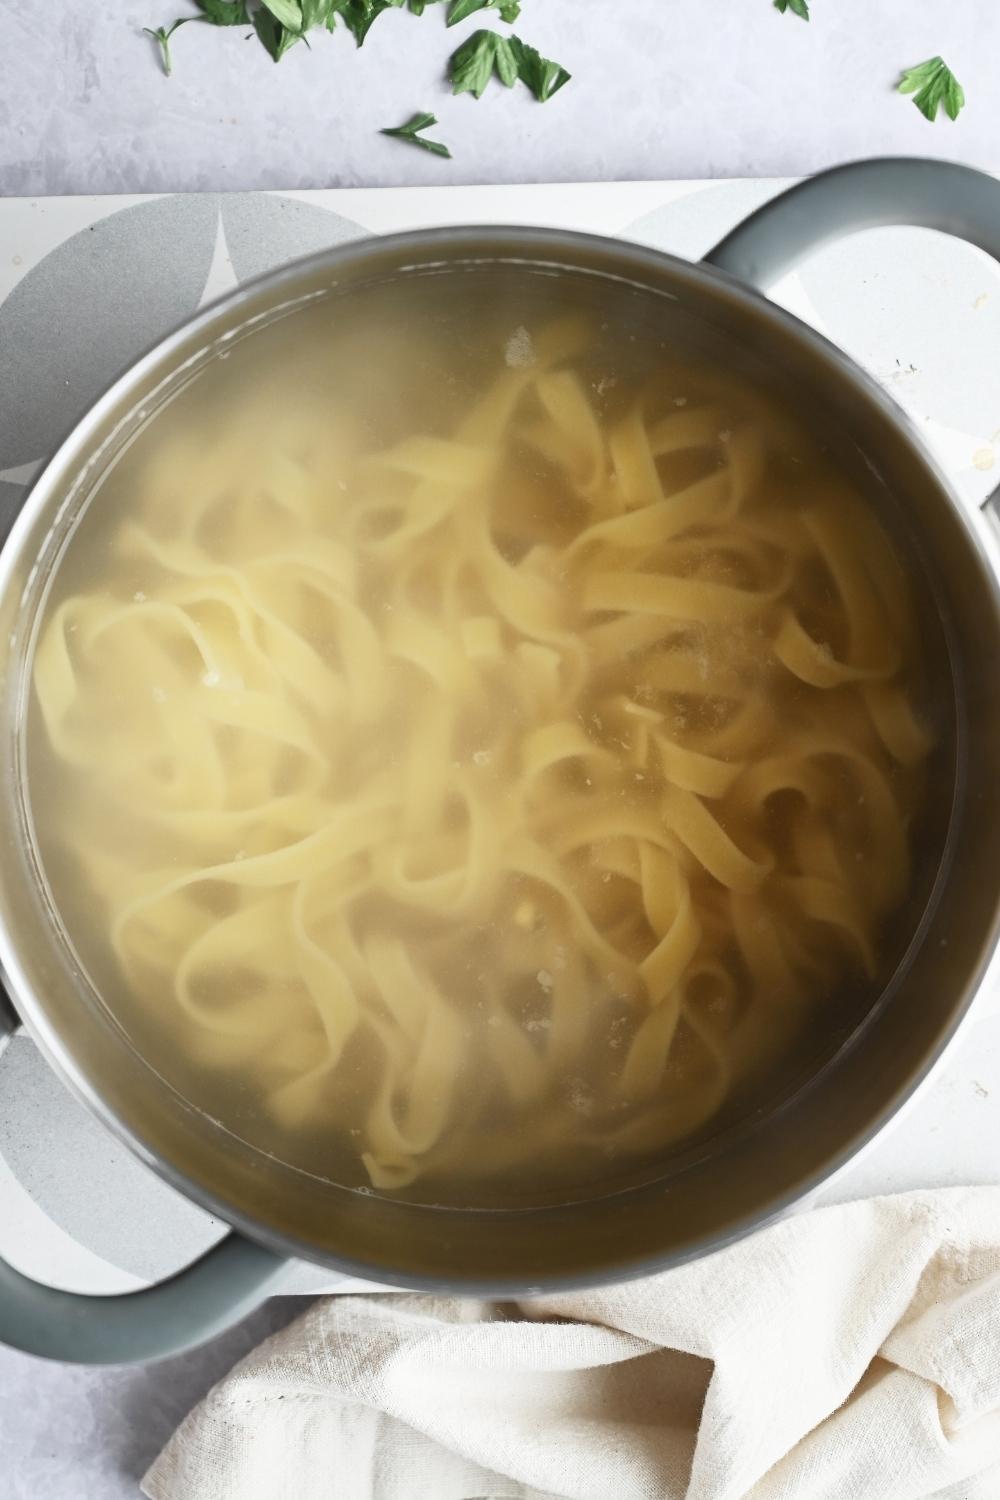 A pot with boiling water cooking fettuccini noodles.